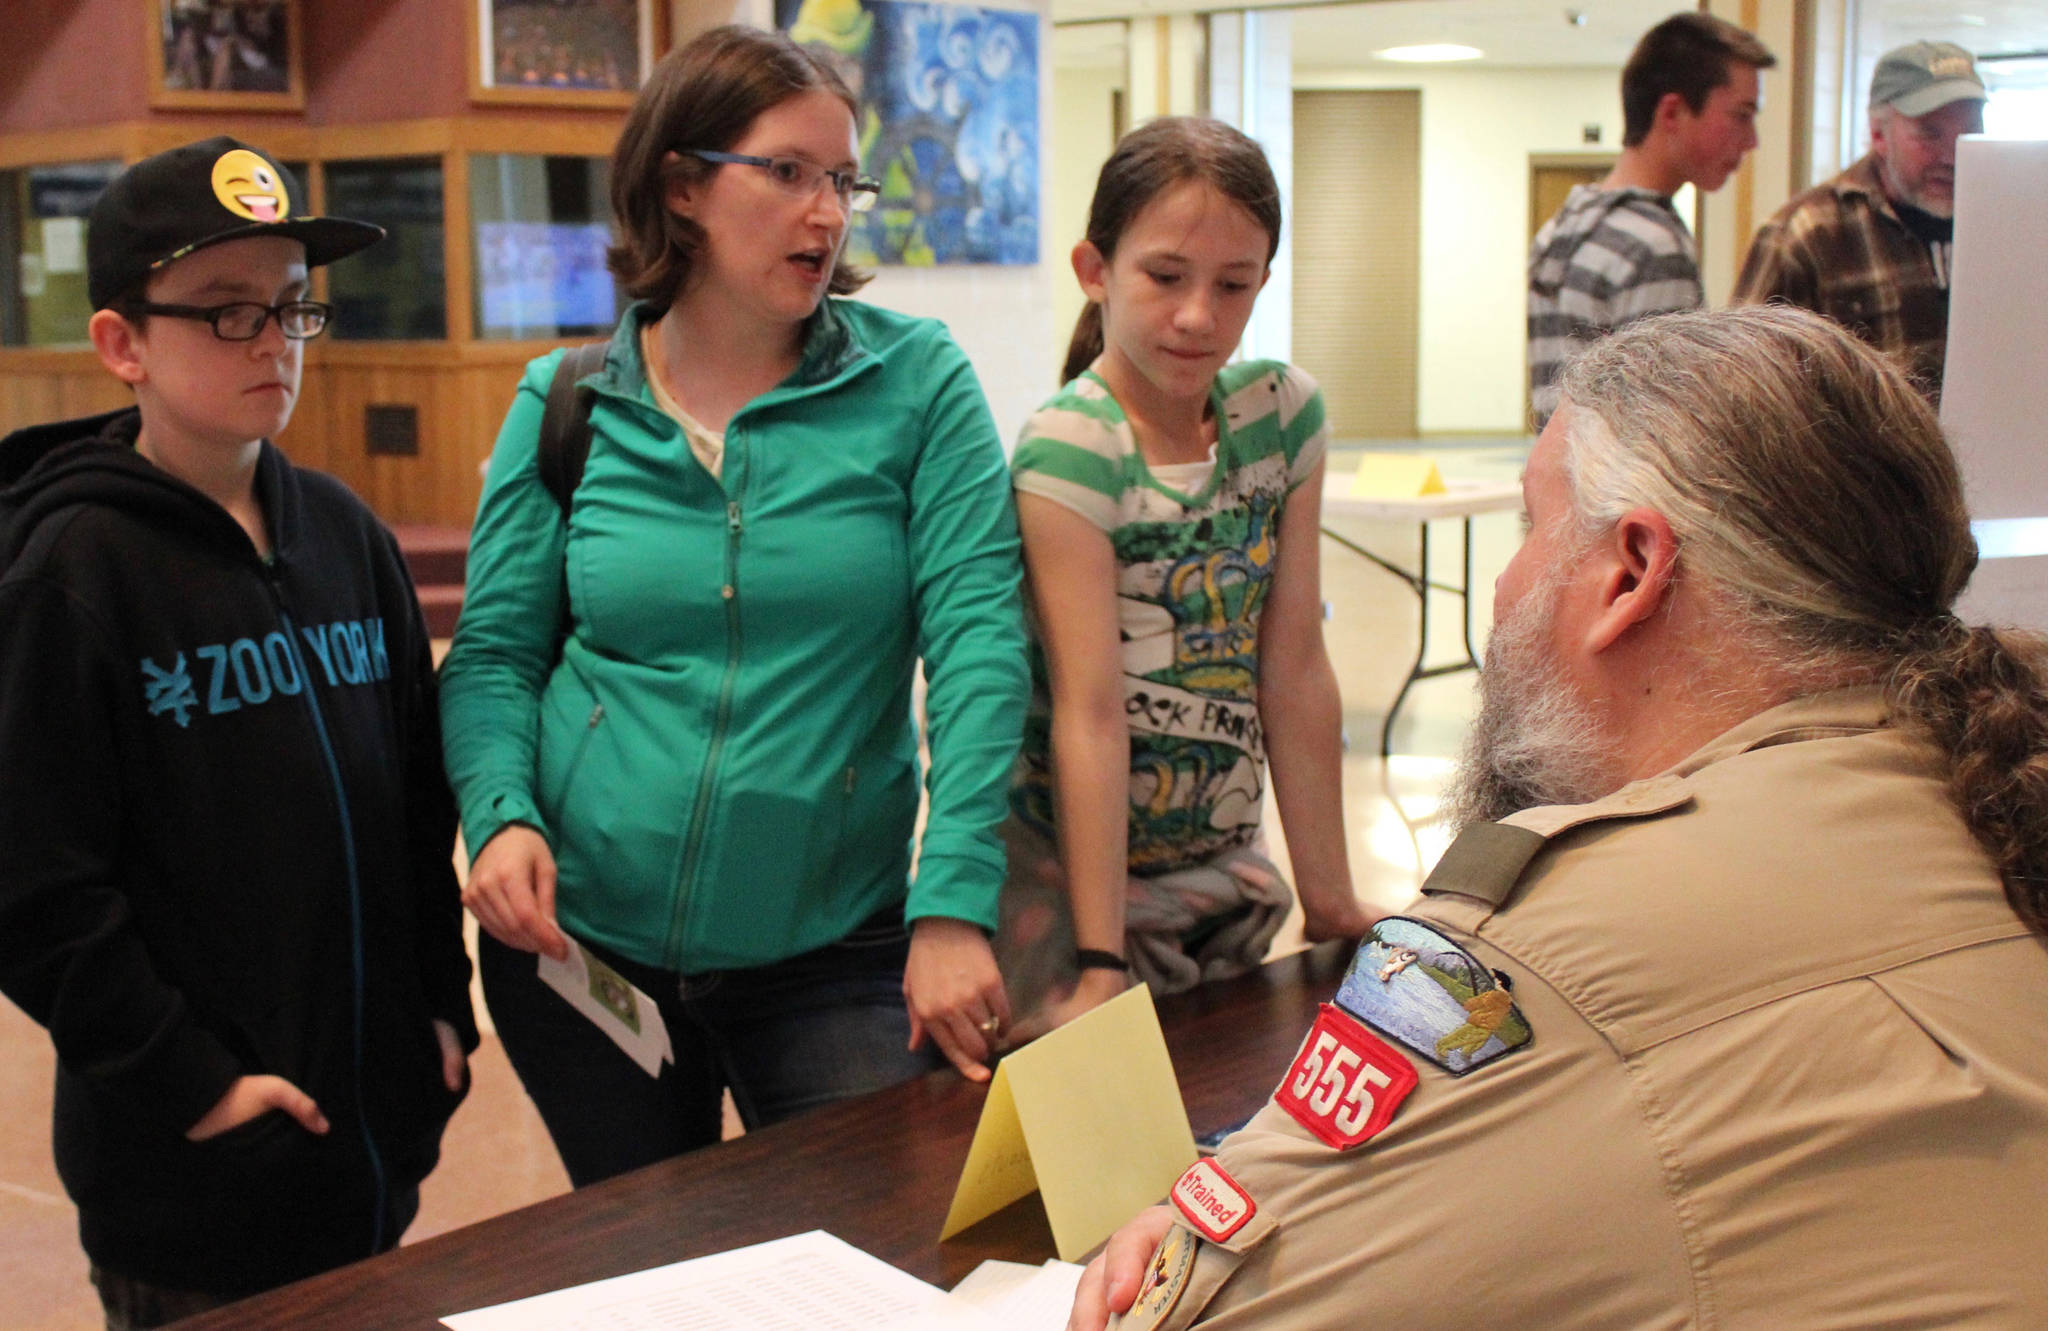 Representing Boy Scouts and Cub Scouts of America, Brian Partridge, seated, discusses after-school activities with (from left) Ethan Lurus, Megan Lurus, and Jasmine Lurus. (Photo by McKibben Jackinsky for the Homer News)